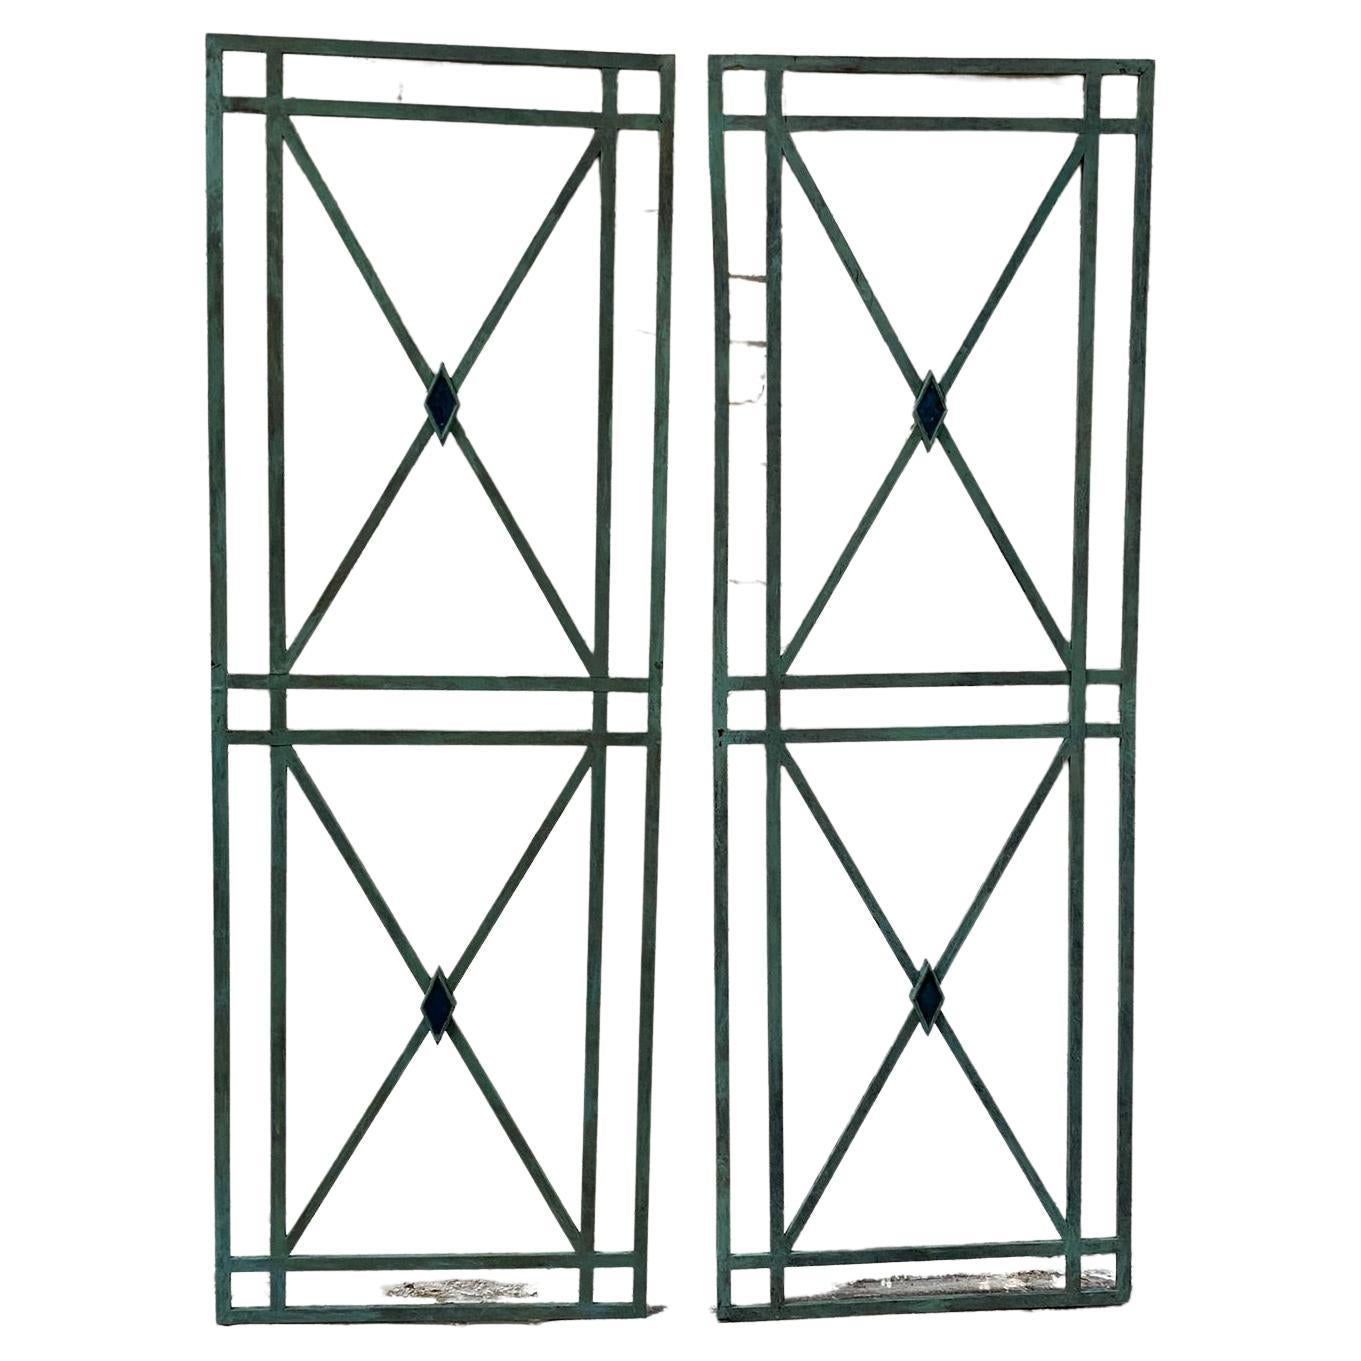 French Directoire style bronze wall mounted panels, the classic X-frame panels with central diamond made from molten enamel. 

So stylish, these panels can be wall mounted to give classical architectural feature to any room.

The panels have